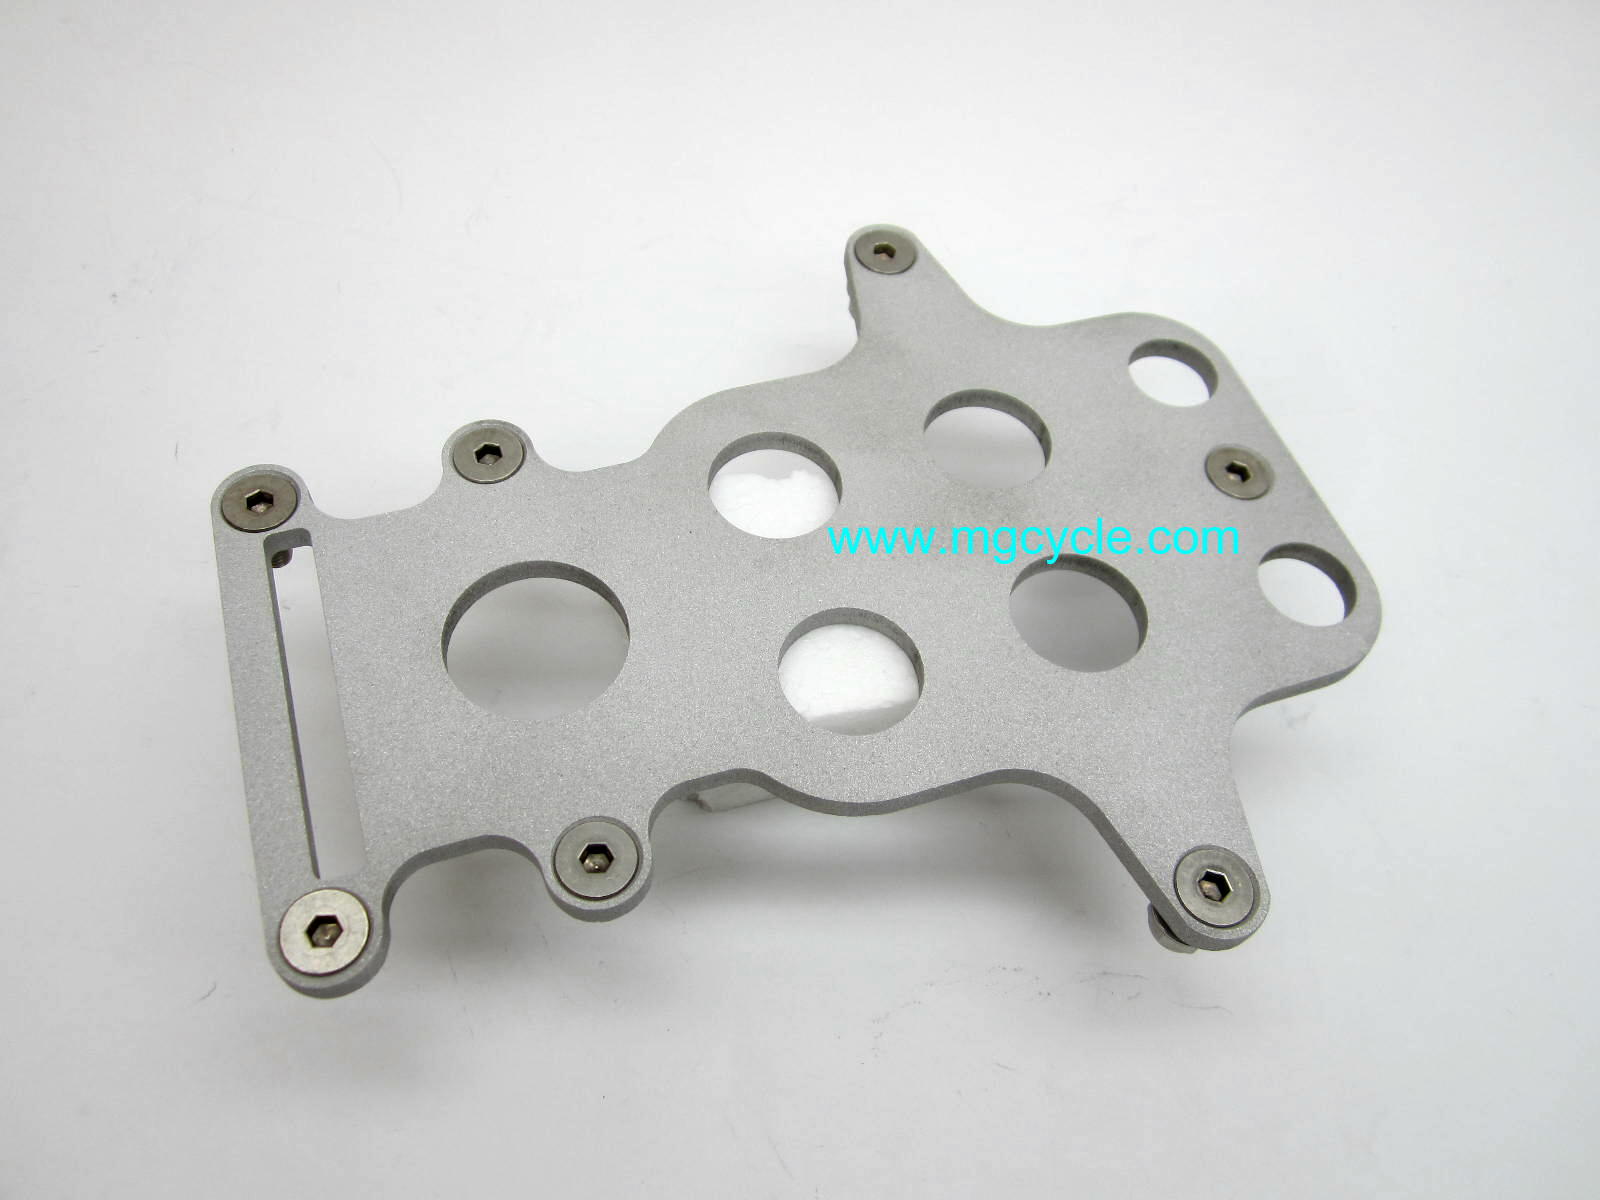 Alloy battery plate, custom applications - Click Image to Close